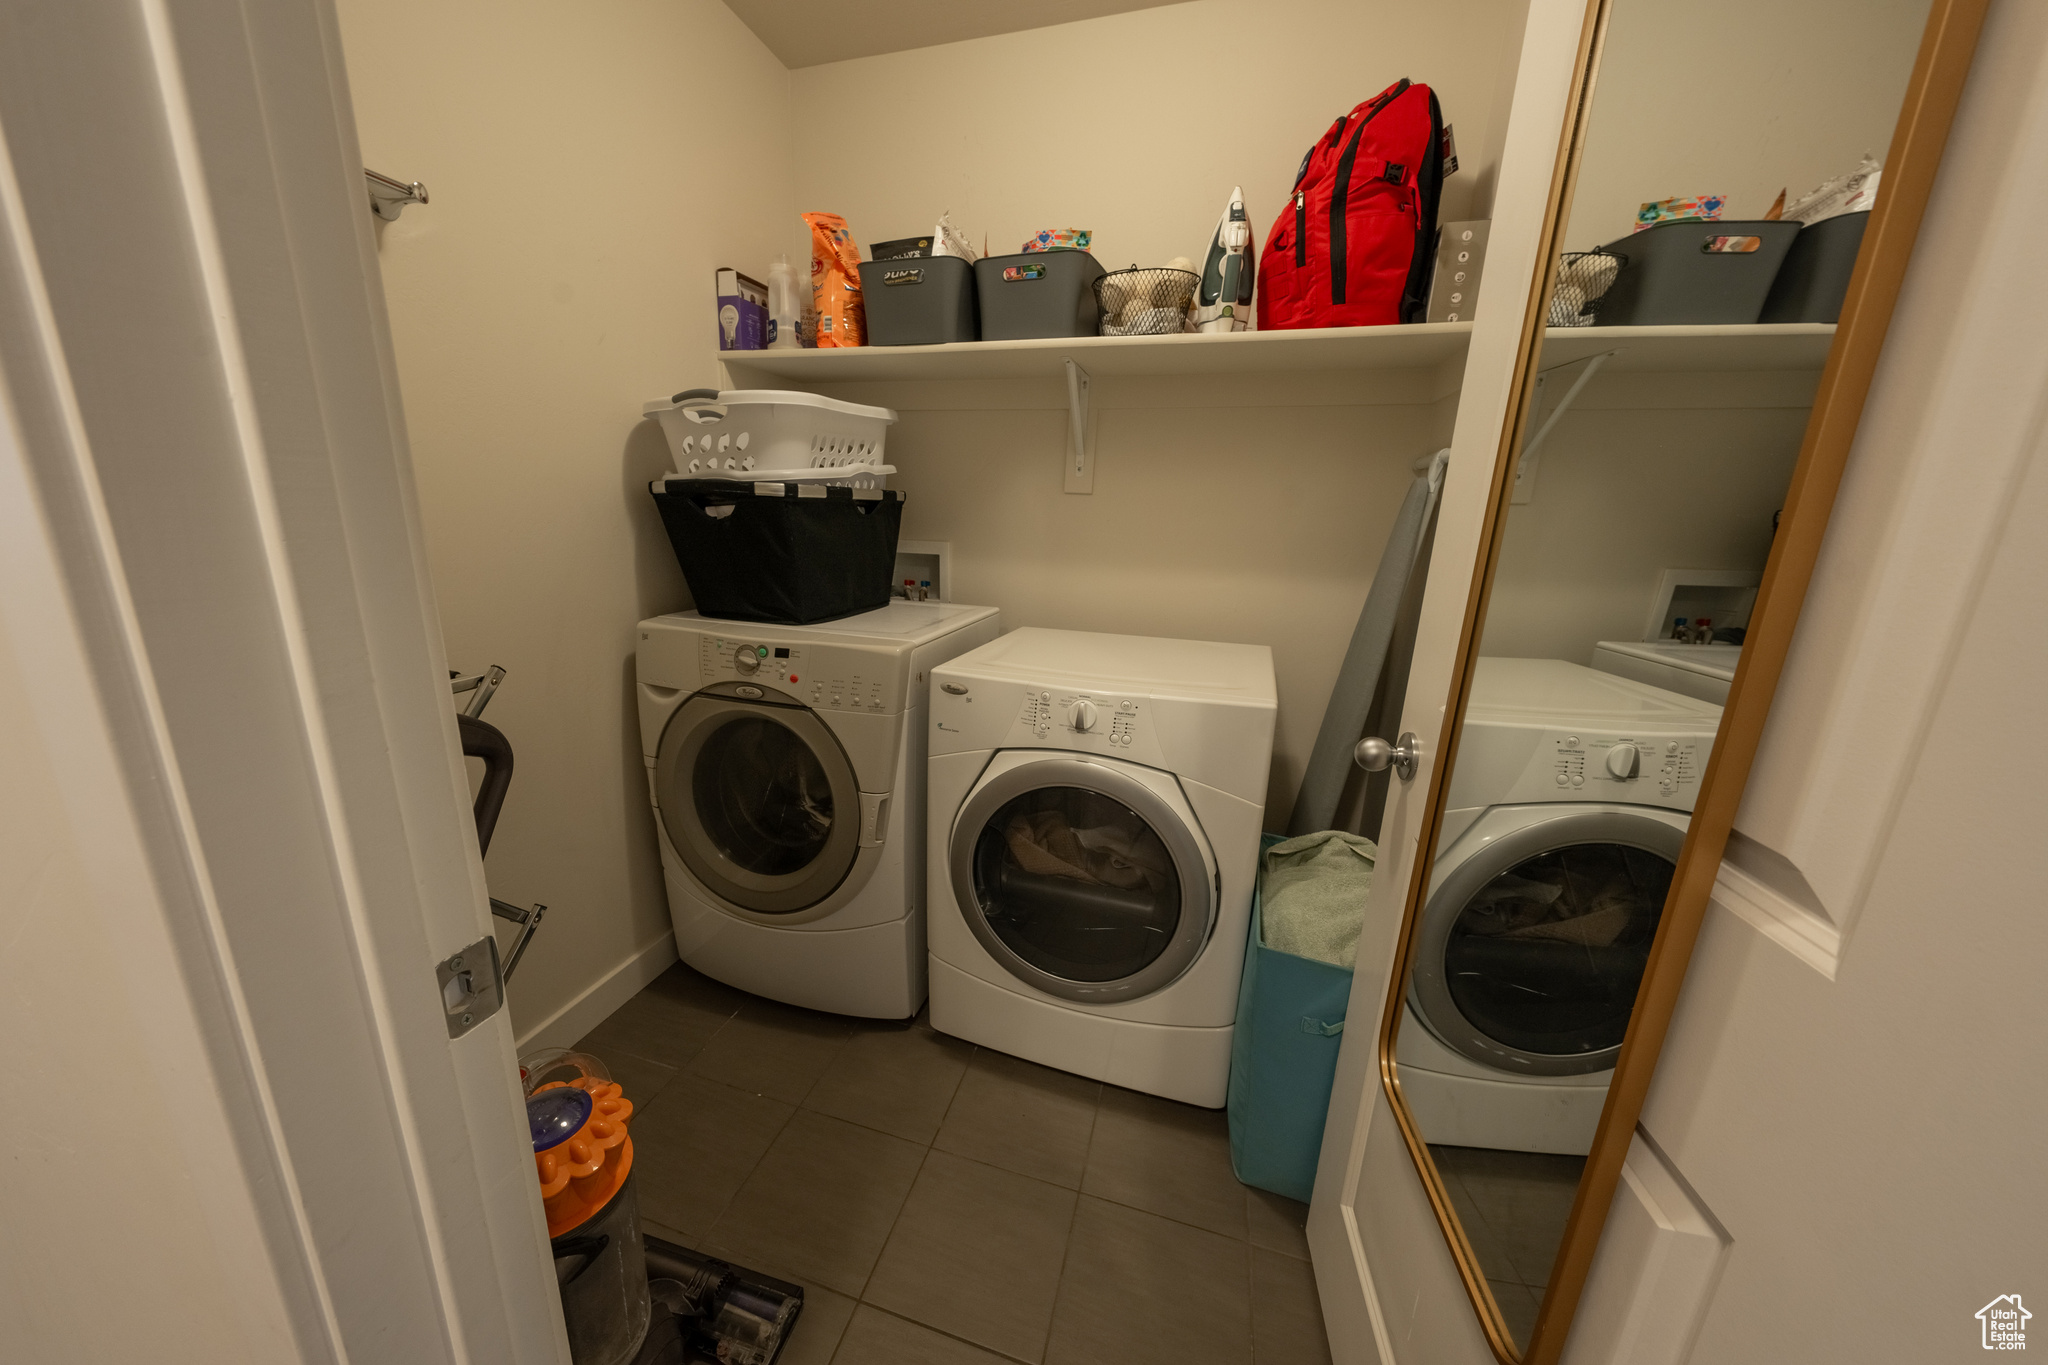 Laundry room with dark tile flooring, hookup for a washing machine, and washer and dryer